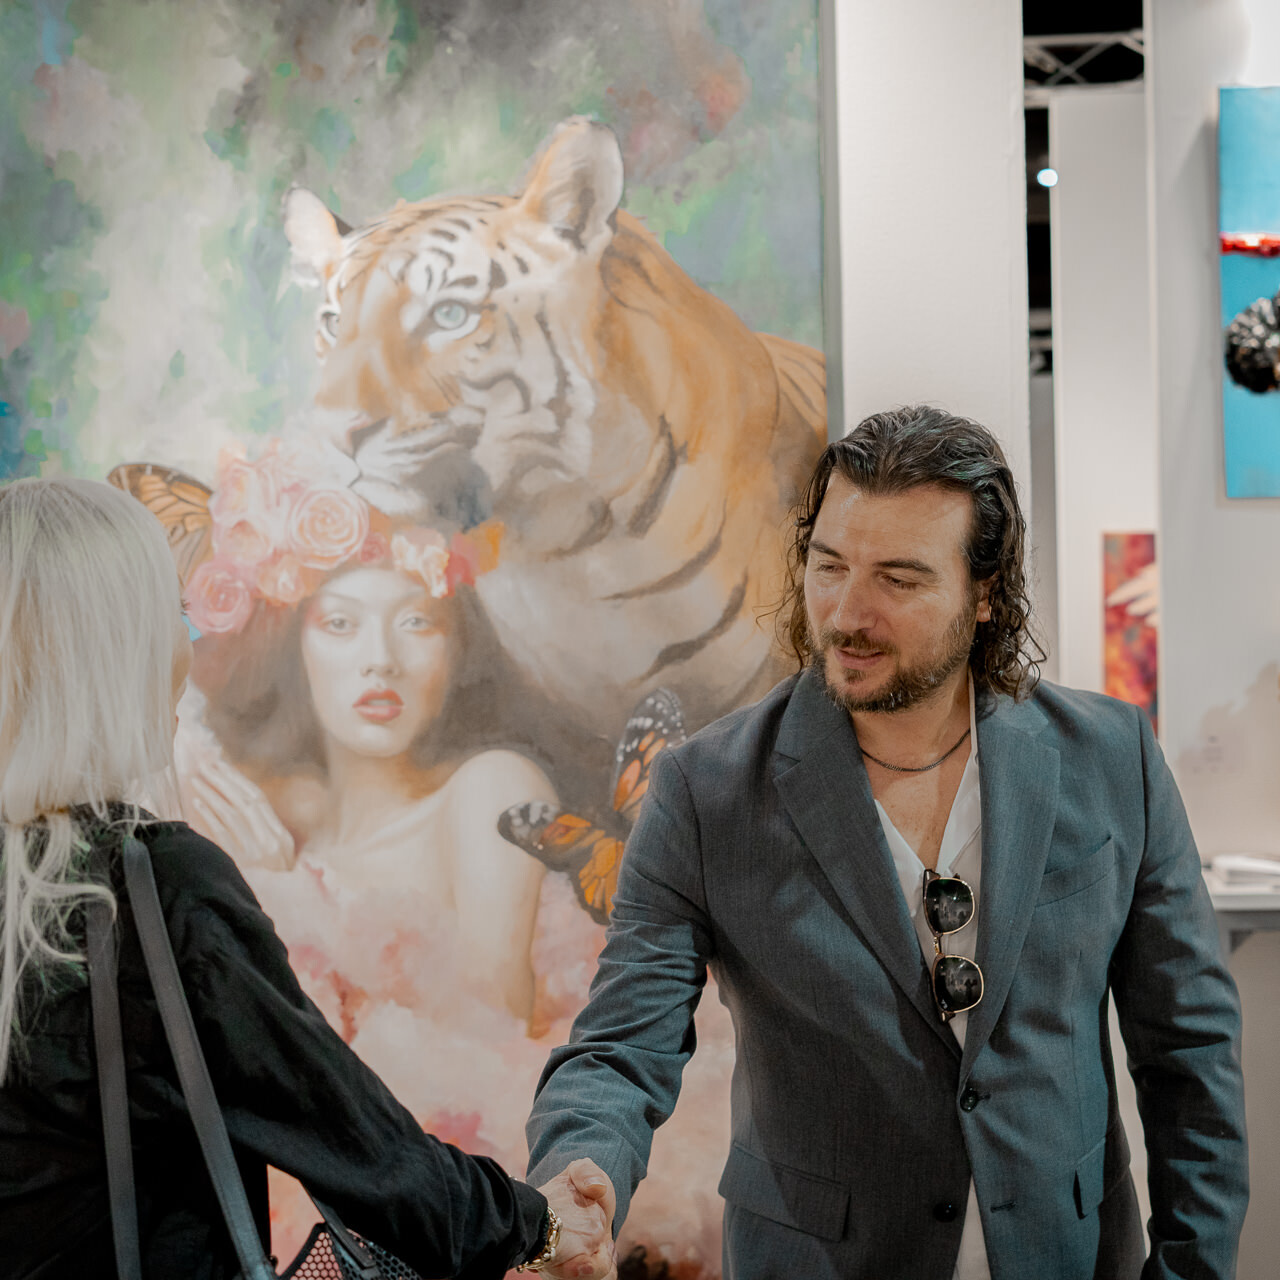 rtist Alex Righetto warmly shakes hands with a visitor against the backdrop of his vibrant painting 'The Guardian' during Miami Art Week.